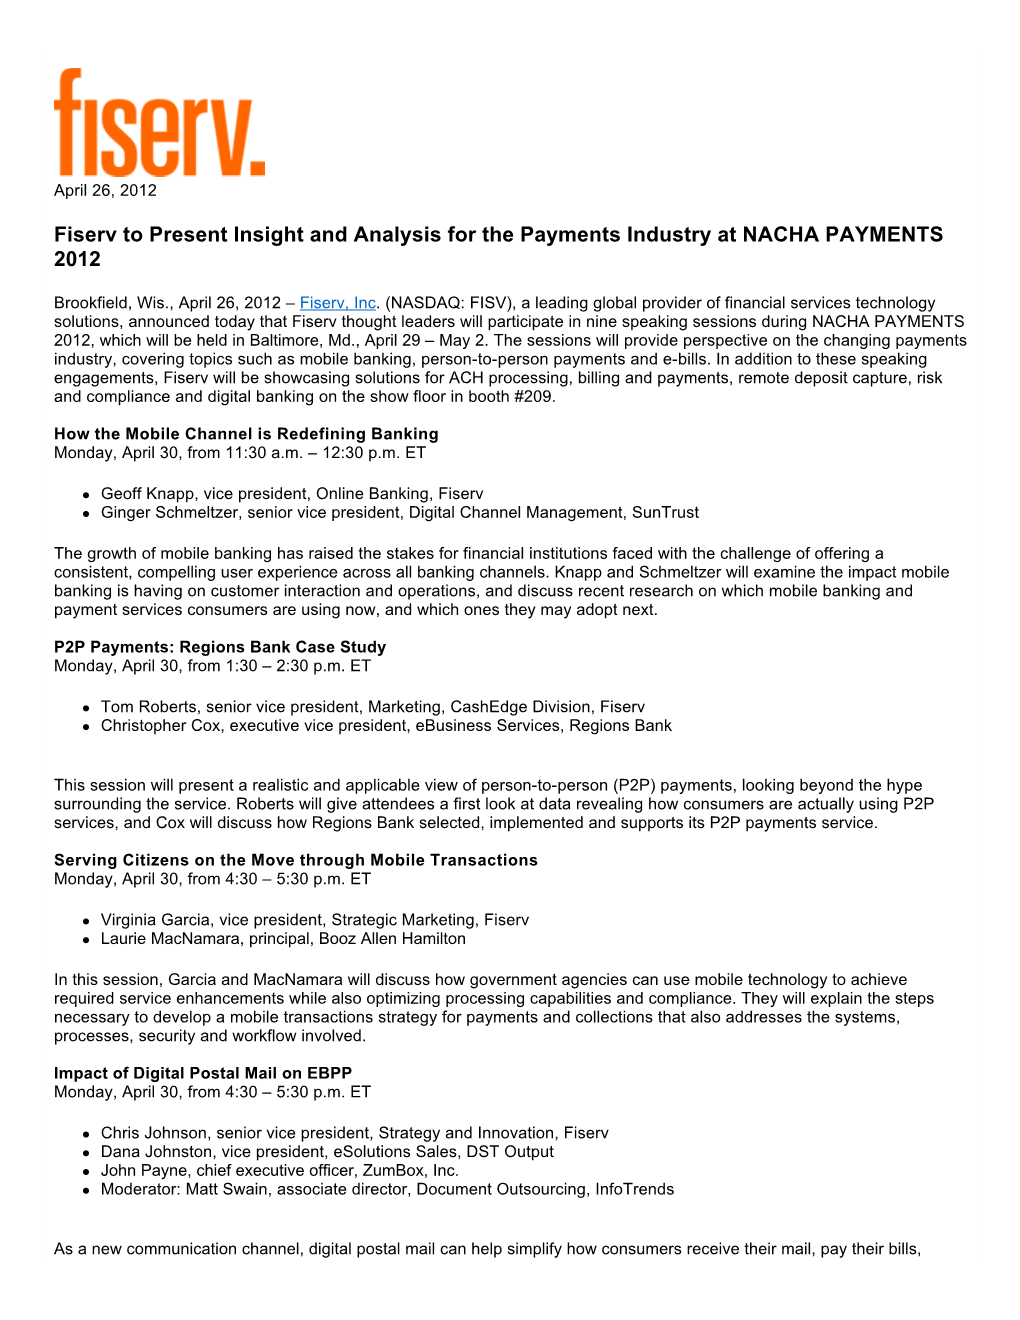 Fiserv to Present Insight and Analysis for the Payments Industry at NACHA PAYMENTS 2012